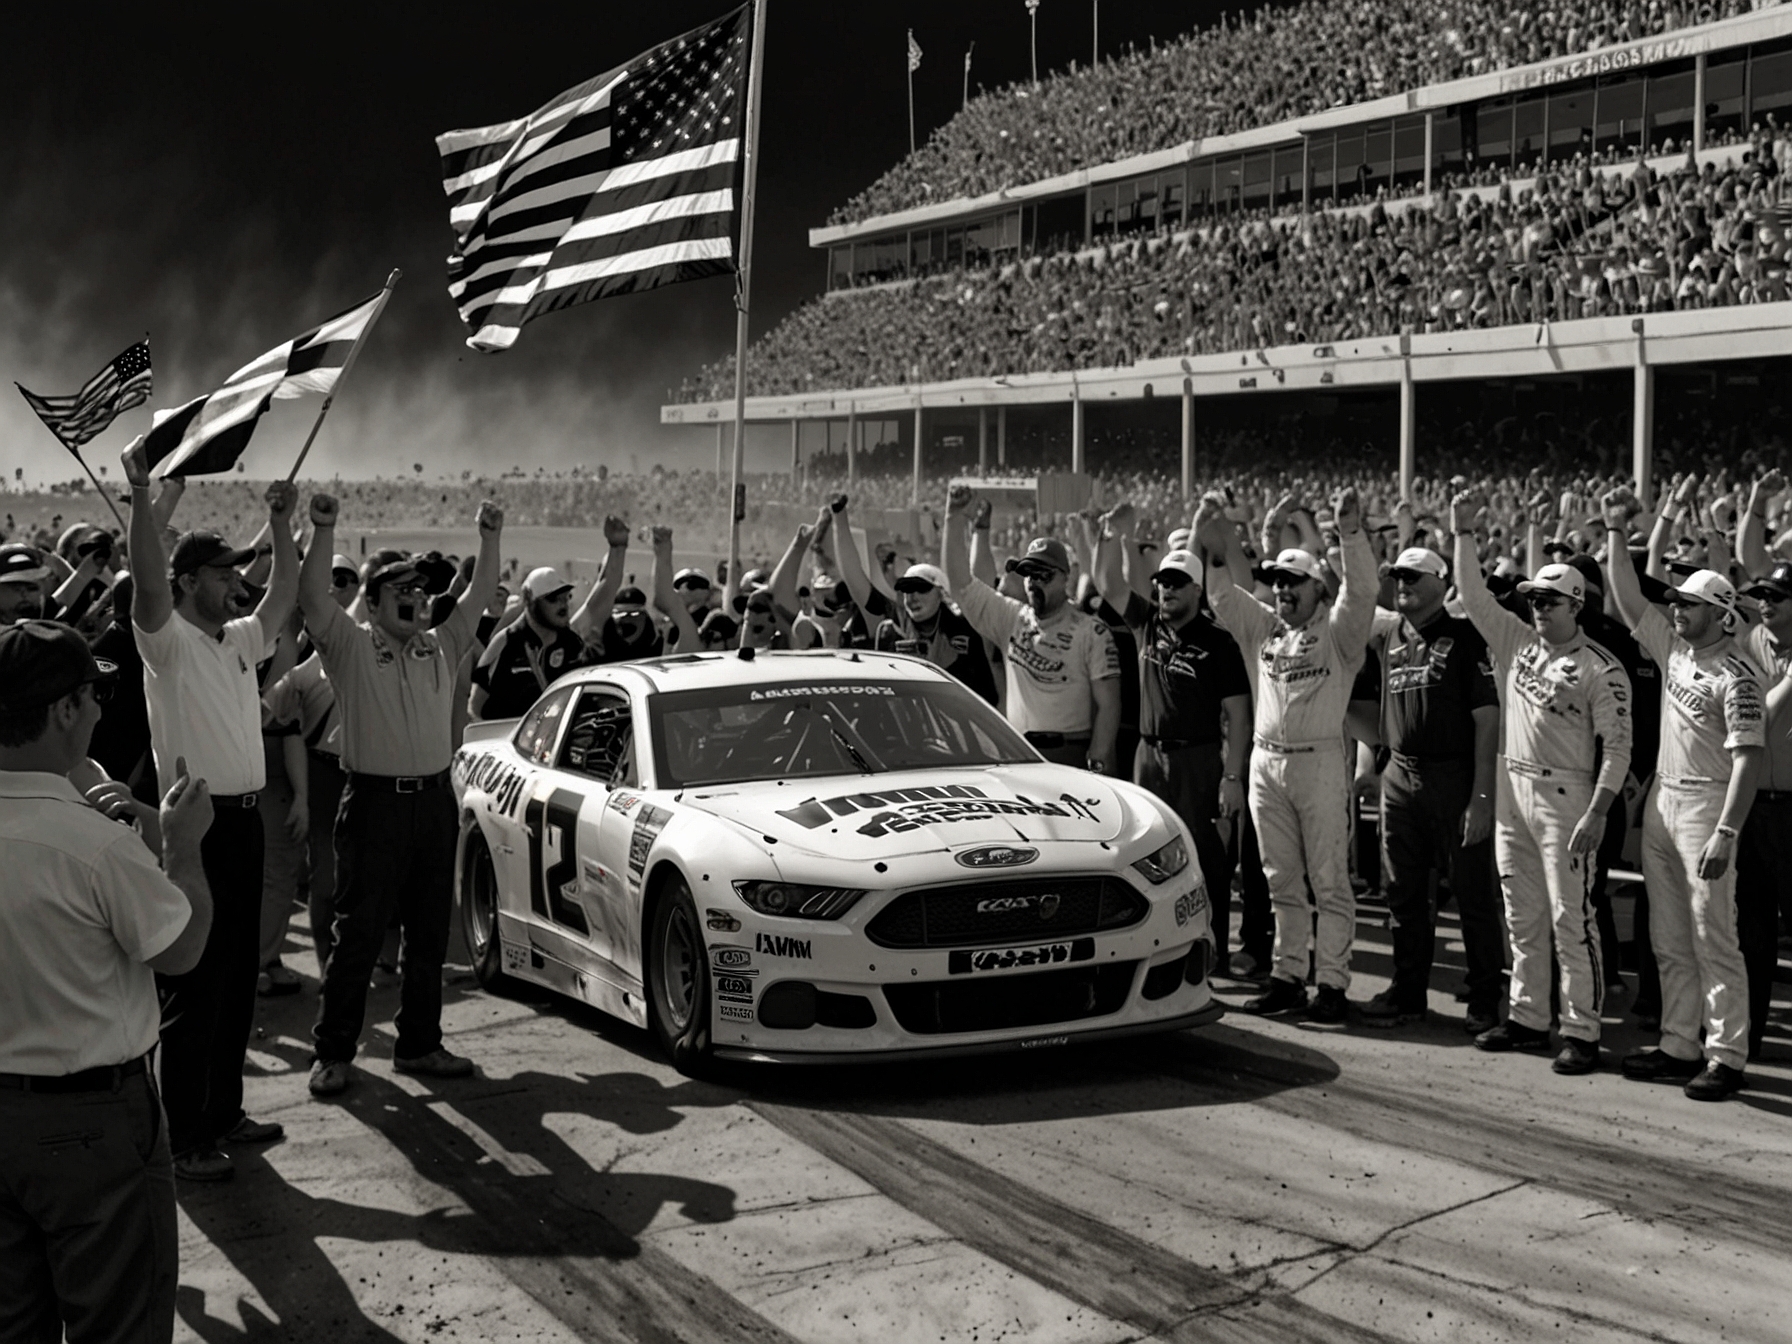 Ryan Blaney celebrates his victory at Iowa Speedway with a checkered flag and his team members surrounding him.